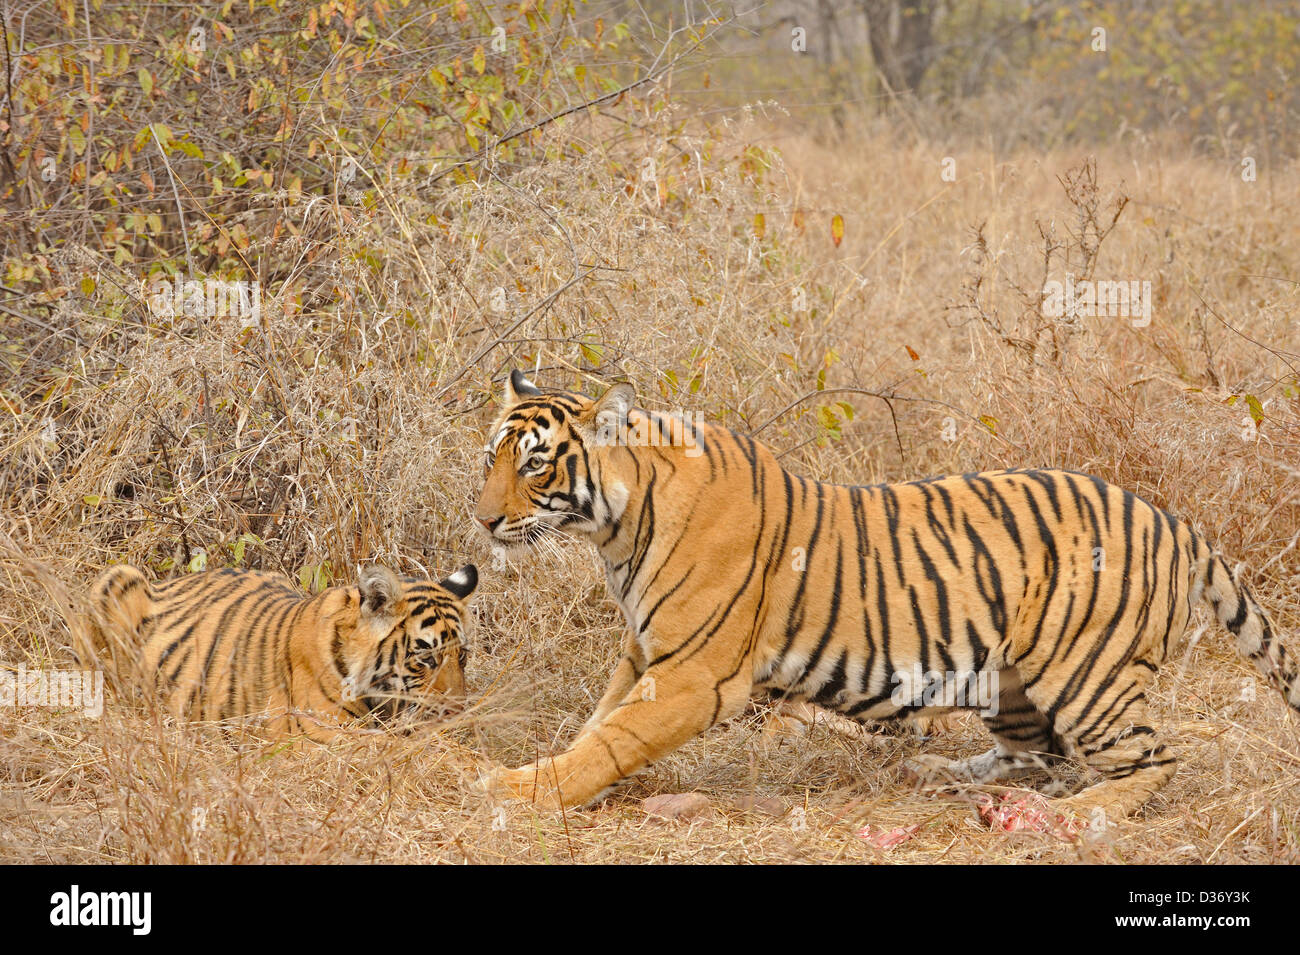 Tiger family - mother and cubs - on a deer kill in the grasslands in Ranthambhore national park, India Stock Photo